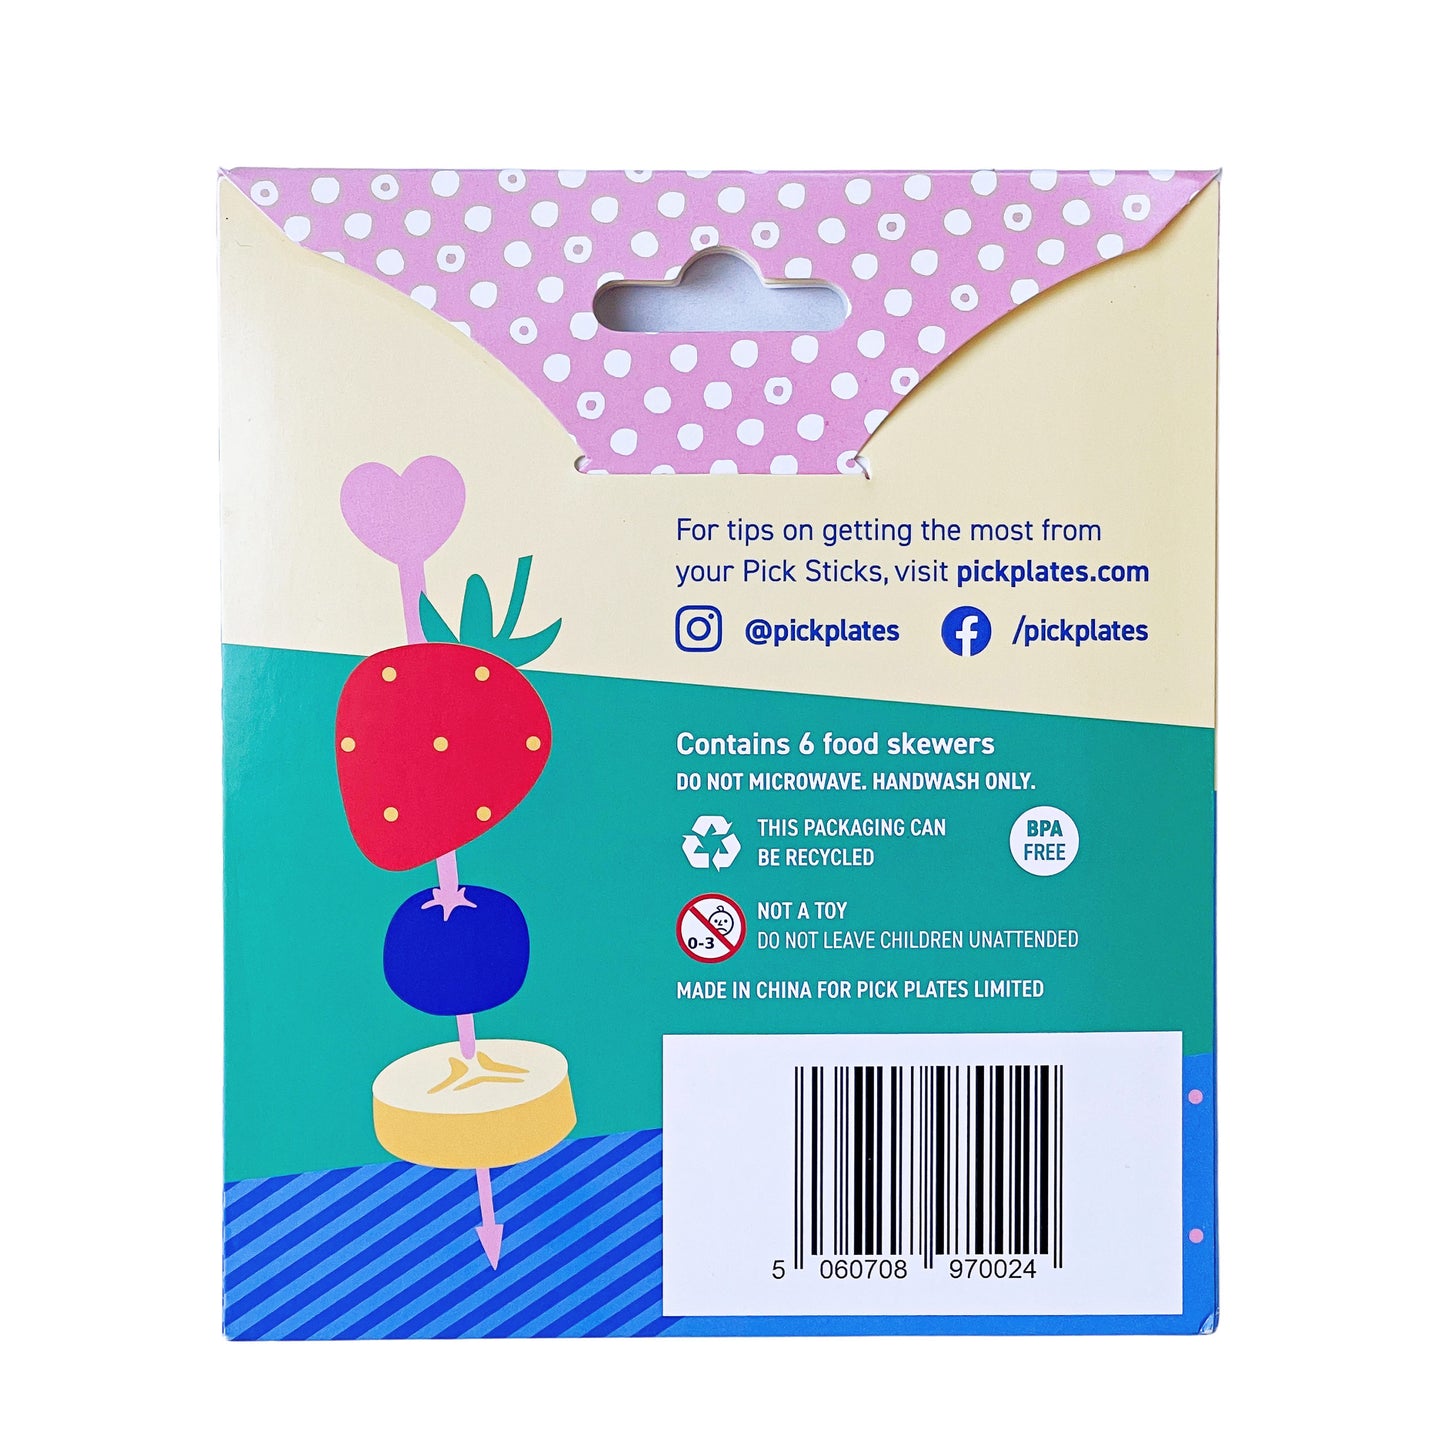 Pick Sticks Pastels food skewers for kids in their colourful packaging from the back showing text with instructions.